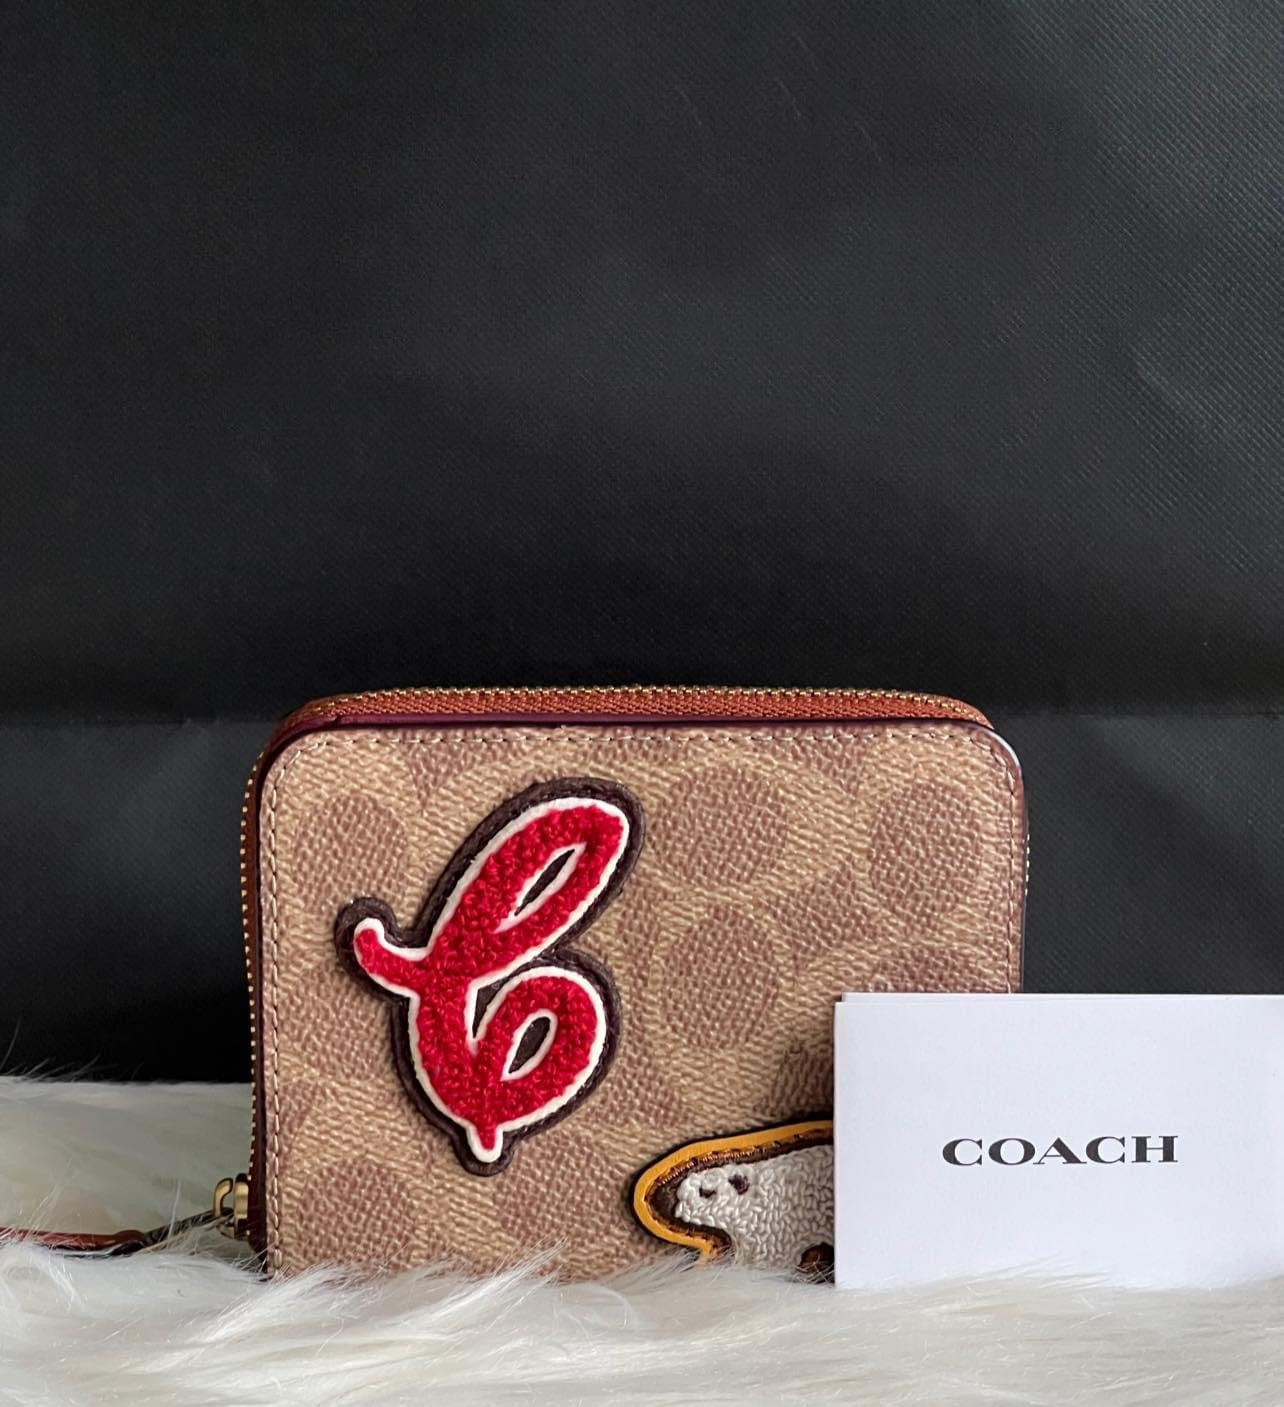 Coach Billfold Wallet in Signature Canvas with Patches